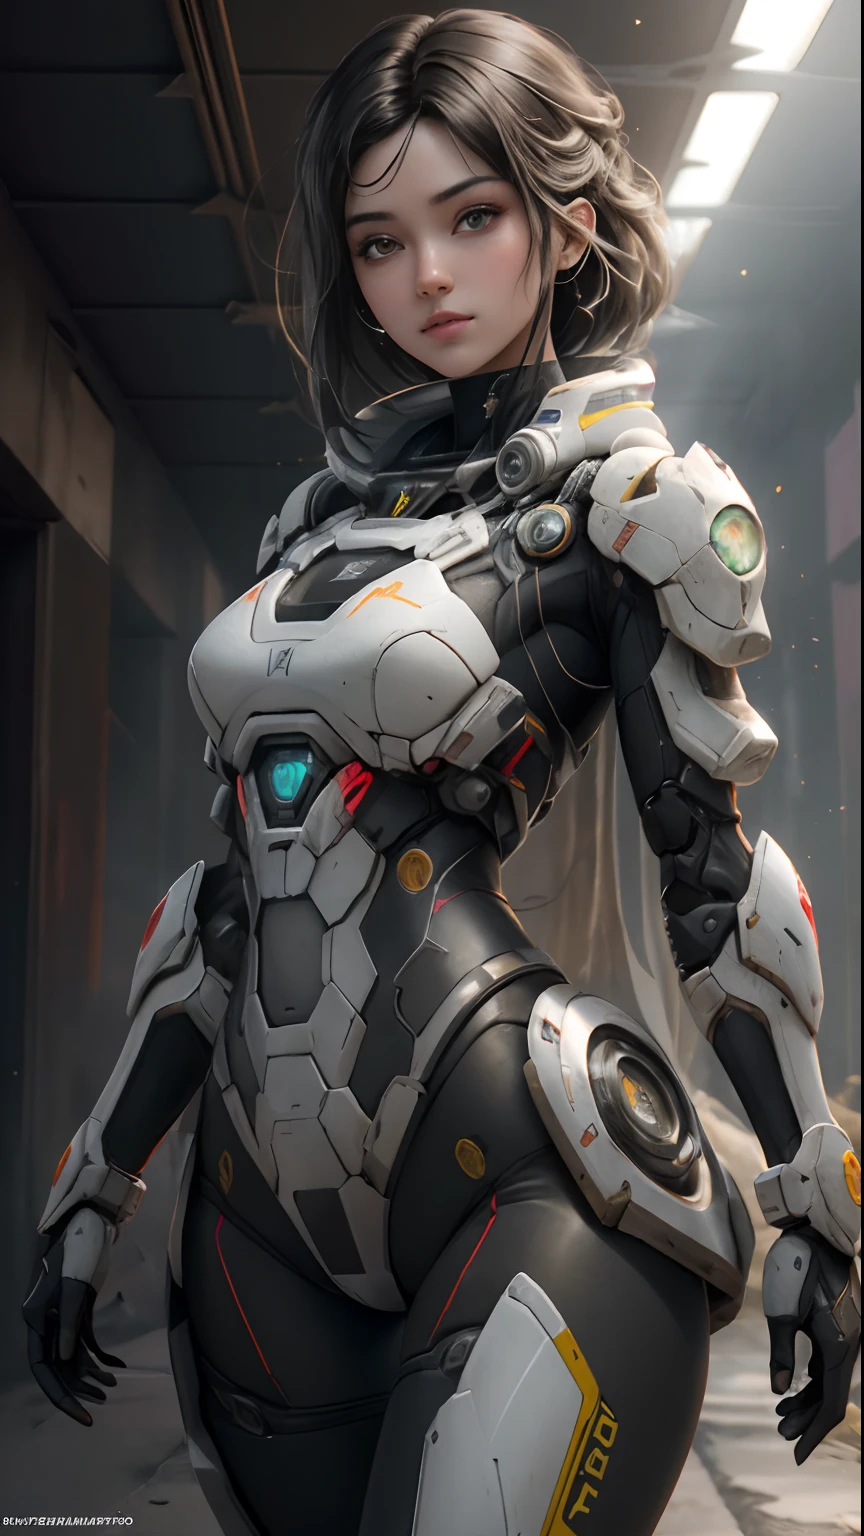 ((Best Quality)), ((masterpiece)), (Very detailed: 1.3), ....3D, shitu-mecha, beautiful cyberpunk woman with her fuse in the ruins of the city of a forgotten war, ancient technology, HdR (High Dymanic Range), ray tracing, NVIDIA RTX, super resolution, Unreal 5, Sub-Surface Scatterring, Textured PBR, post-processing, Anisotropic filtering, depth of field, Maximum clarity and sharpness, Multilayer textures, albedo and specular maps, surface shading, Accurate simulation of light-material interaction, perfect proportions, rendered octane, two tone lighting, Low ISO, white balance, rule of thirds, wide opening, 8K RAW, Efficient Sub-Pixel, sub-pixel convolution, Luminescent Particles, Light scattering, Tyndall effect